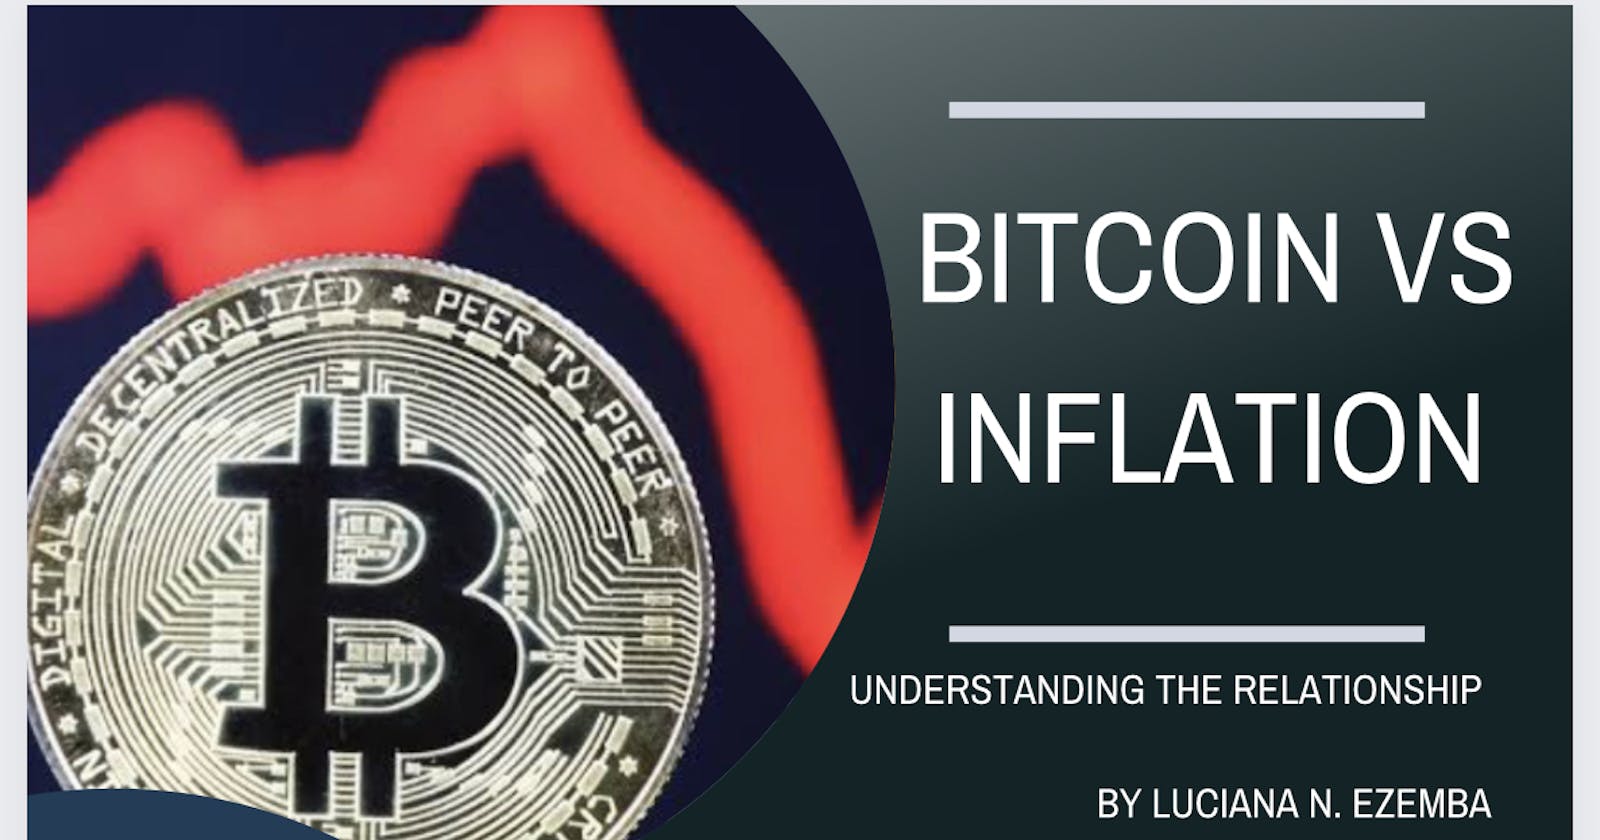 Bitcoin Vs Inflation: A Roadmap to Understanding the Relationship.